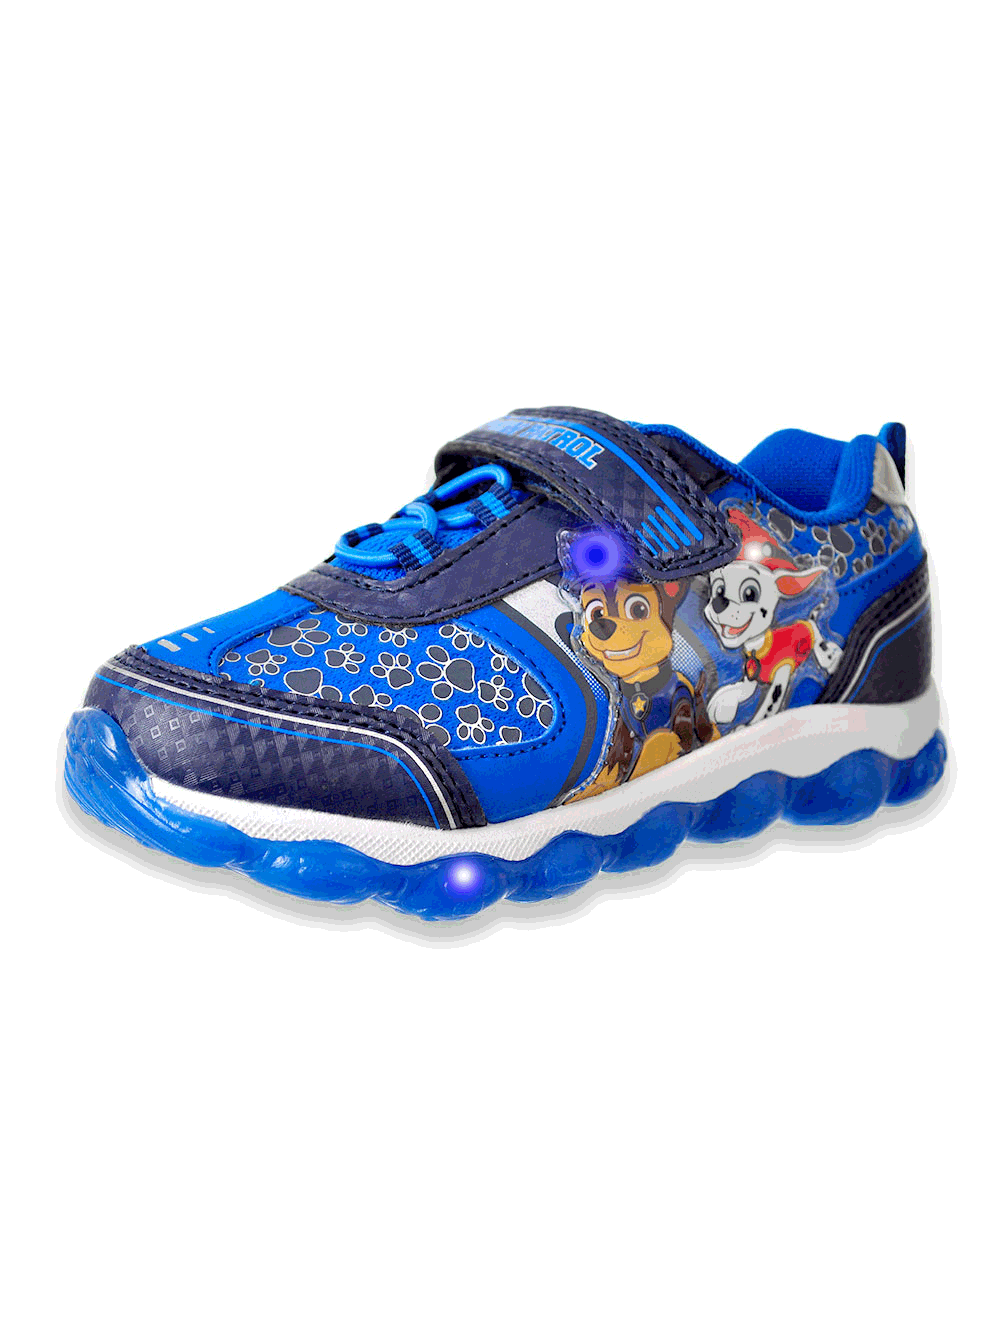 Boys' Single Strap Light-Up Sneakers by 